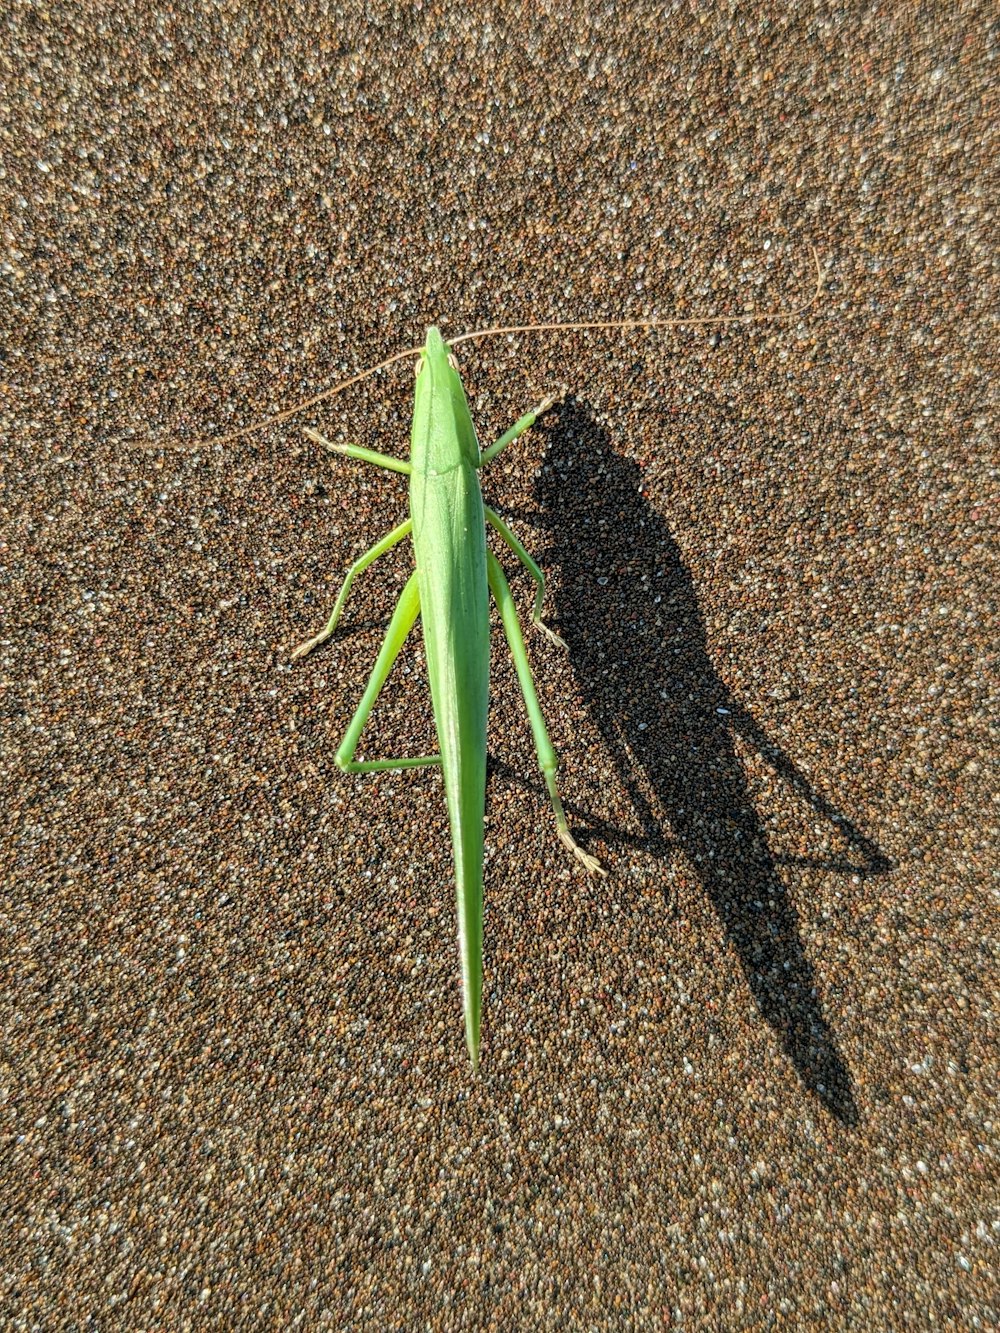 a large green insect sitting on top of a sidewalk